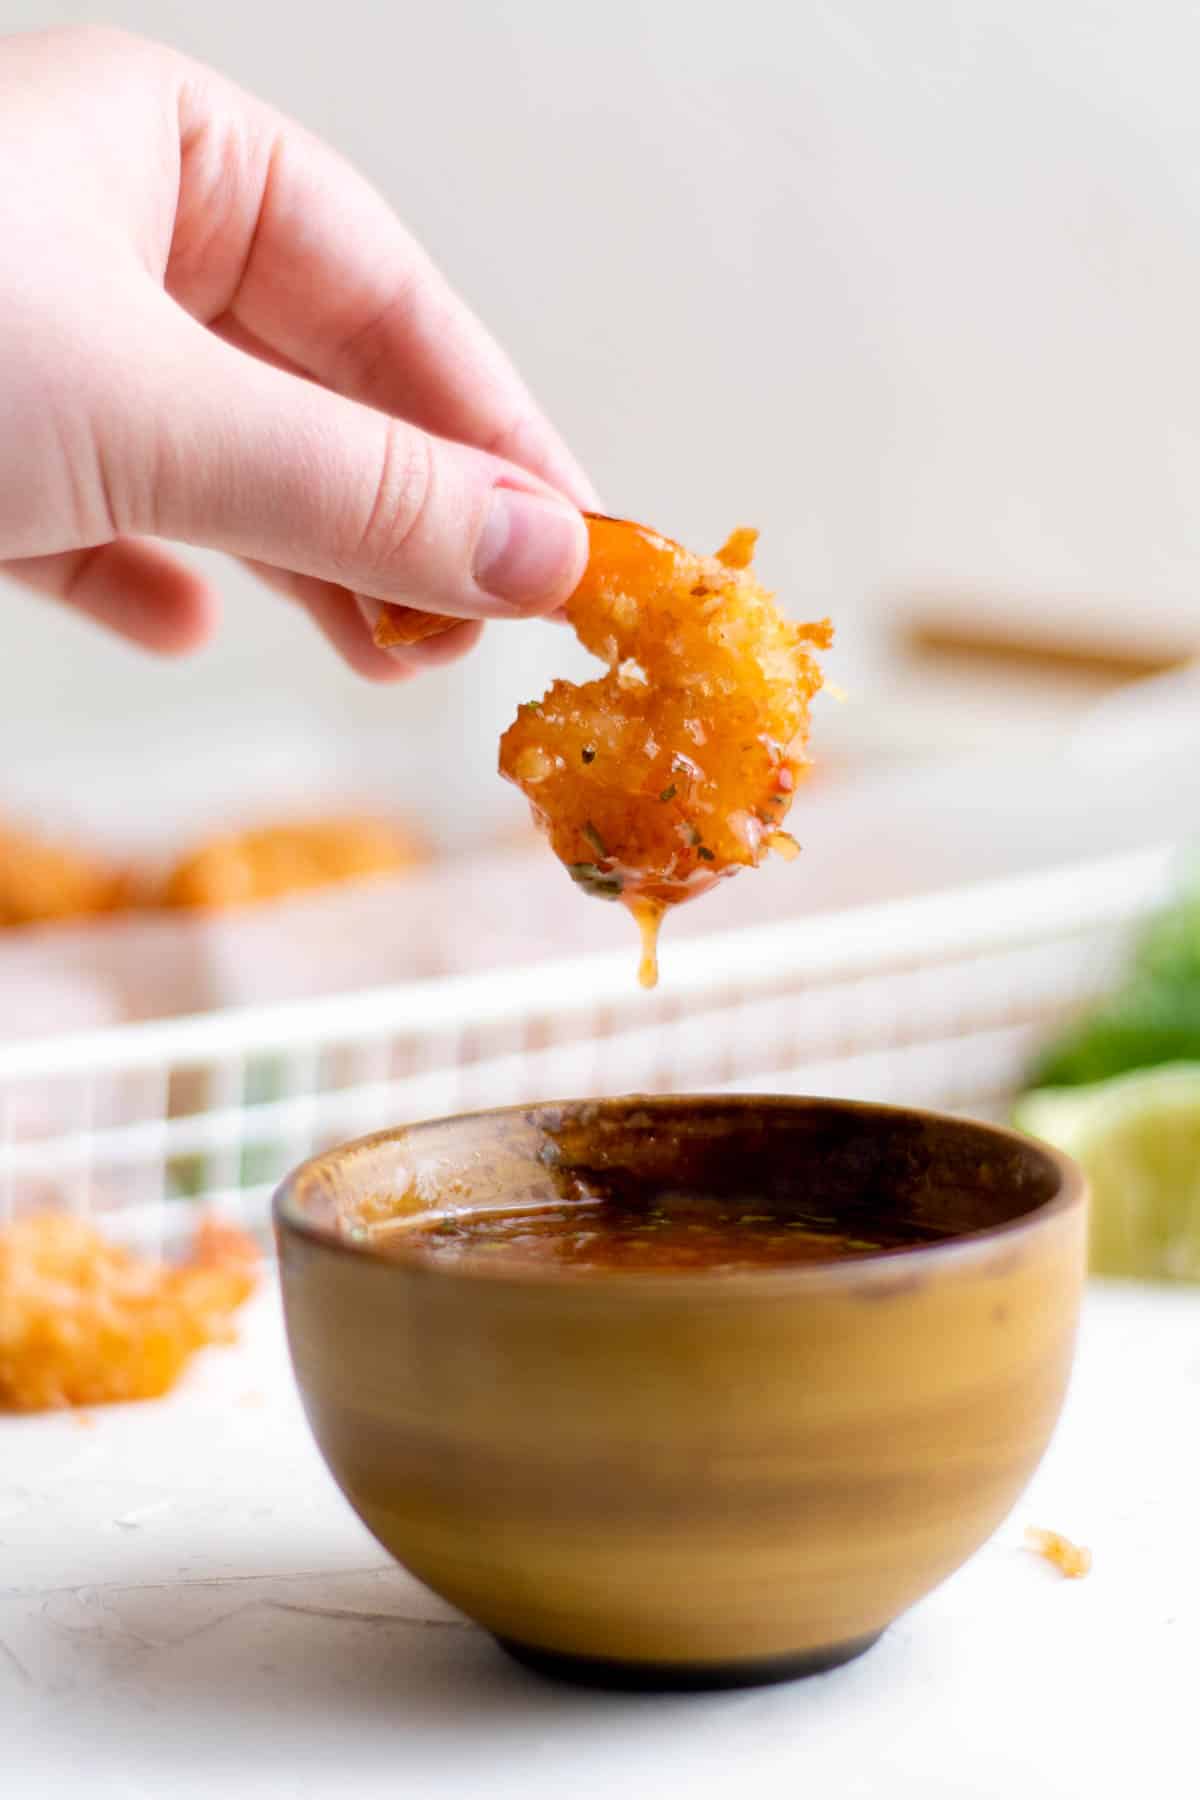 a hand dipping crispy coconut shrimp into a small bowl of sweet chili sauce